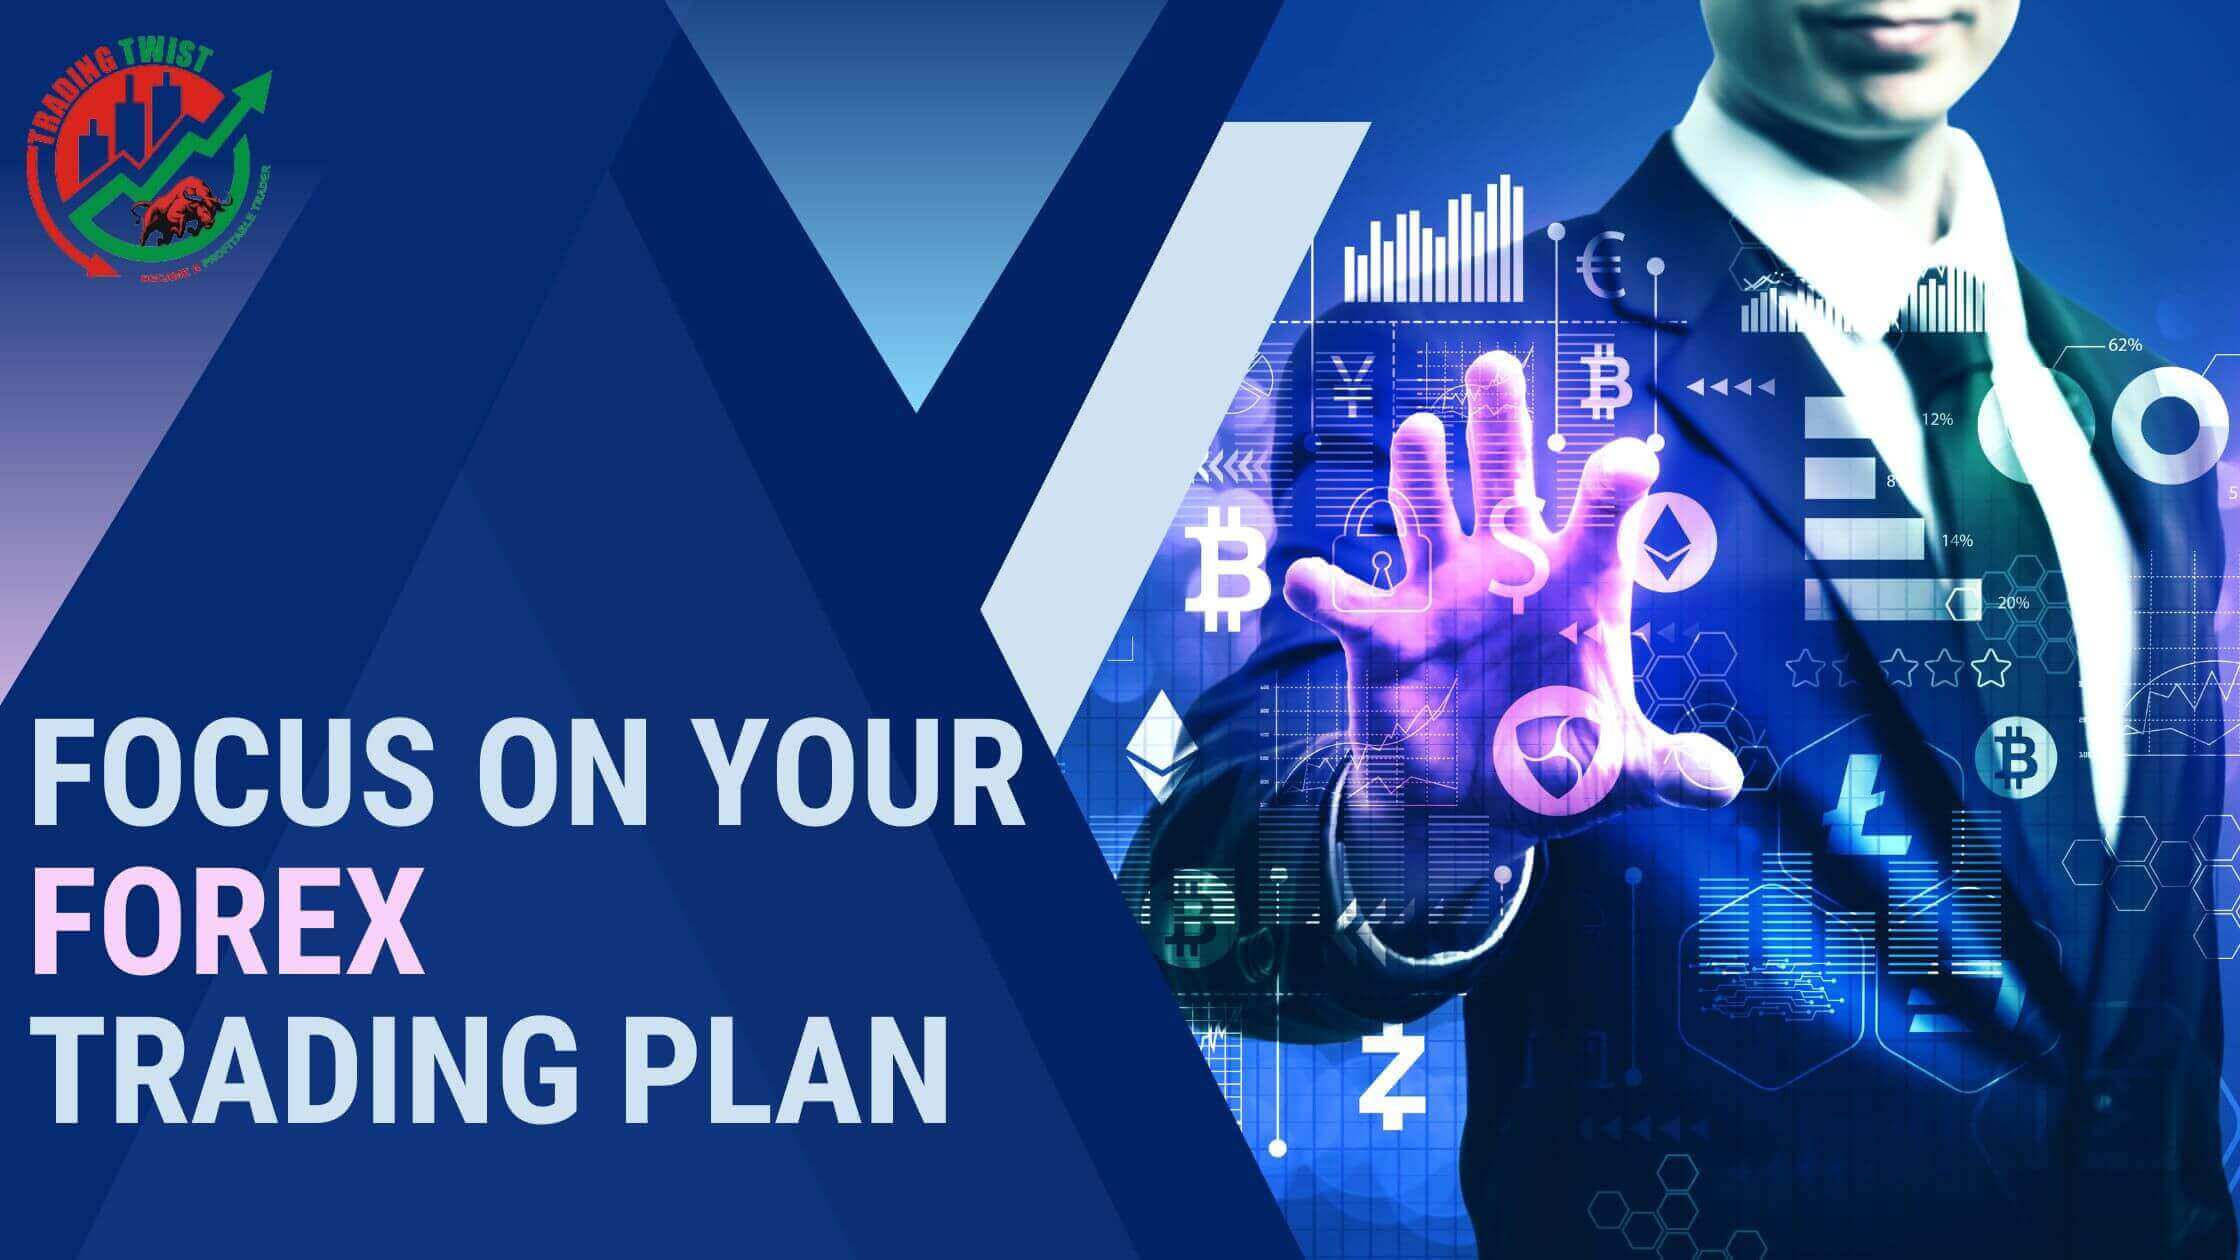 Focus on your trading plan in forex